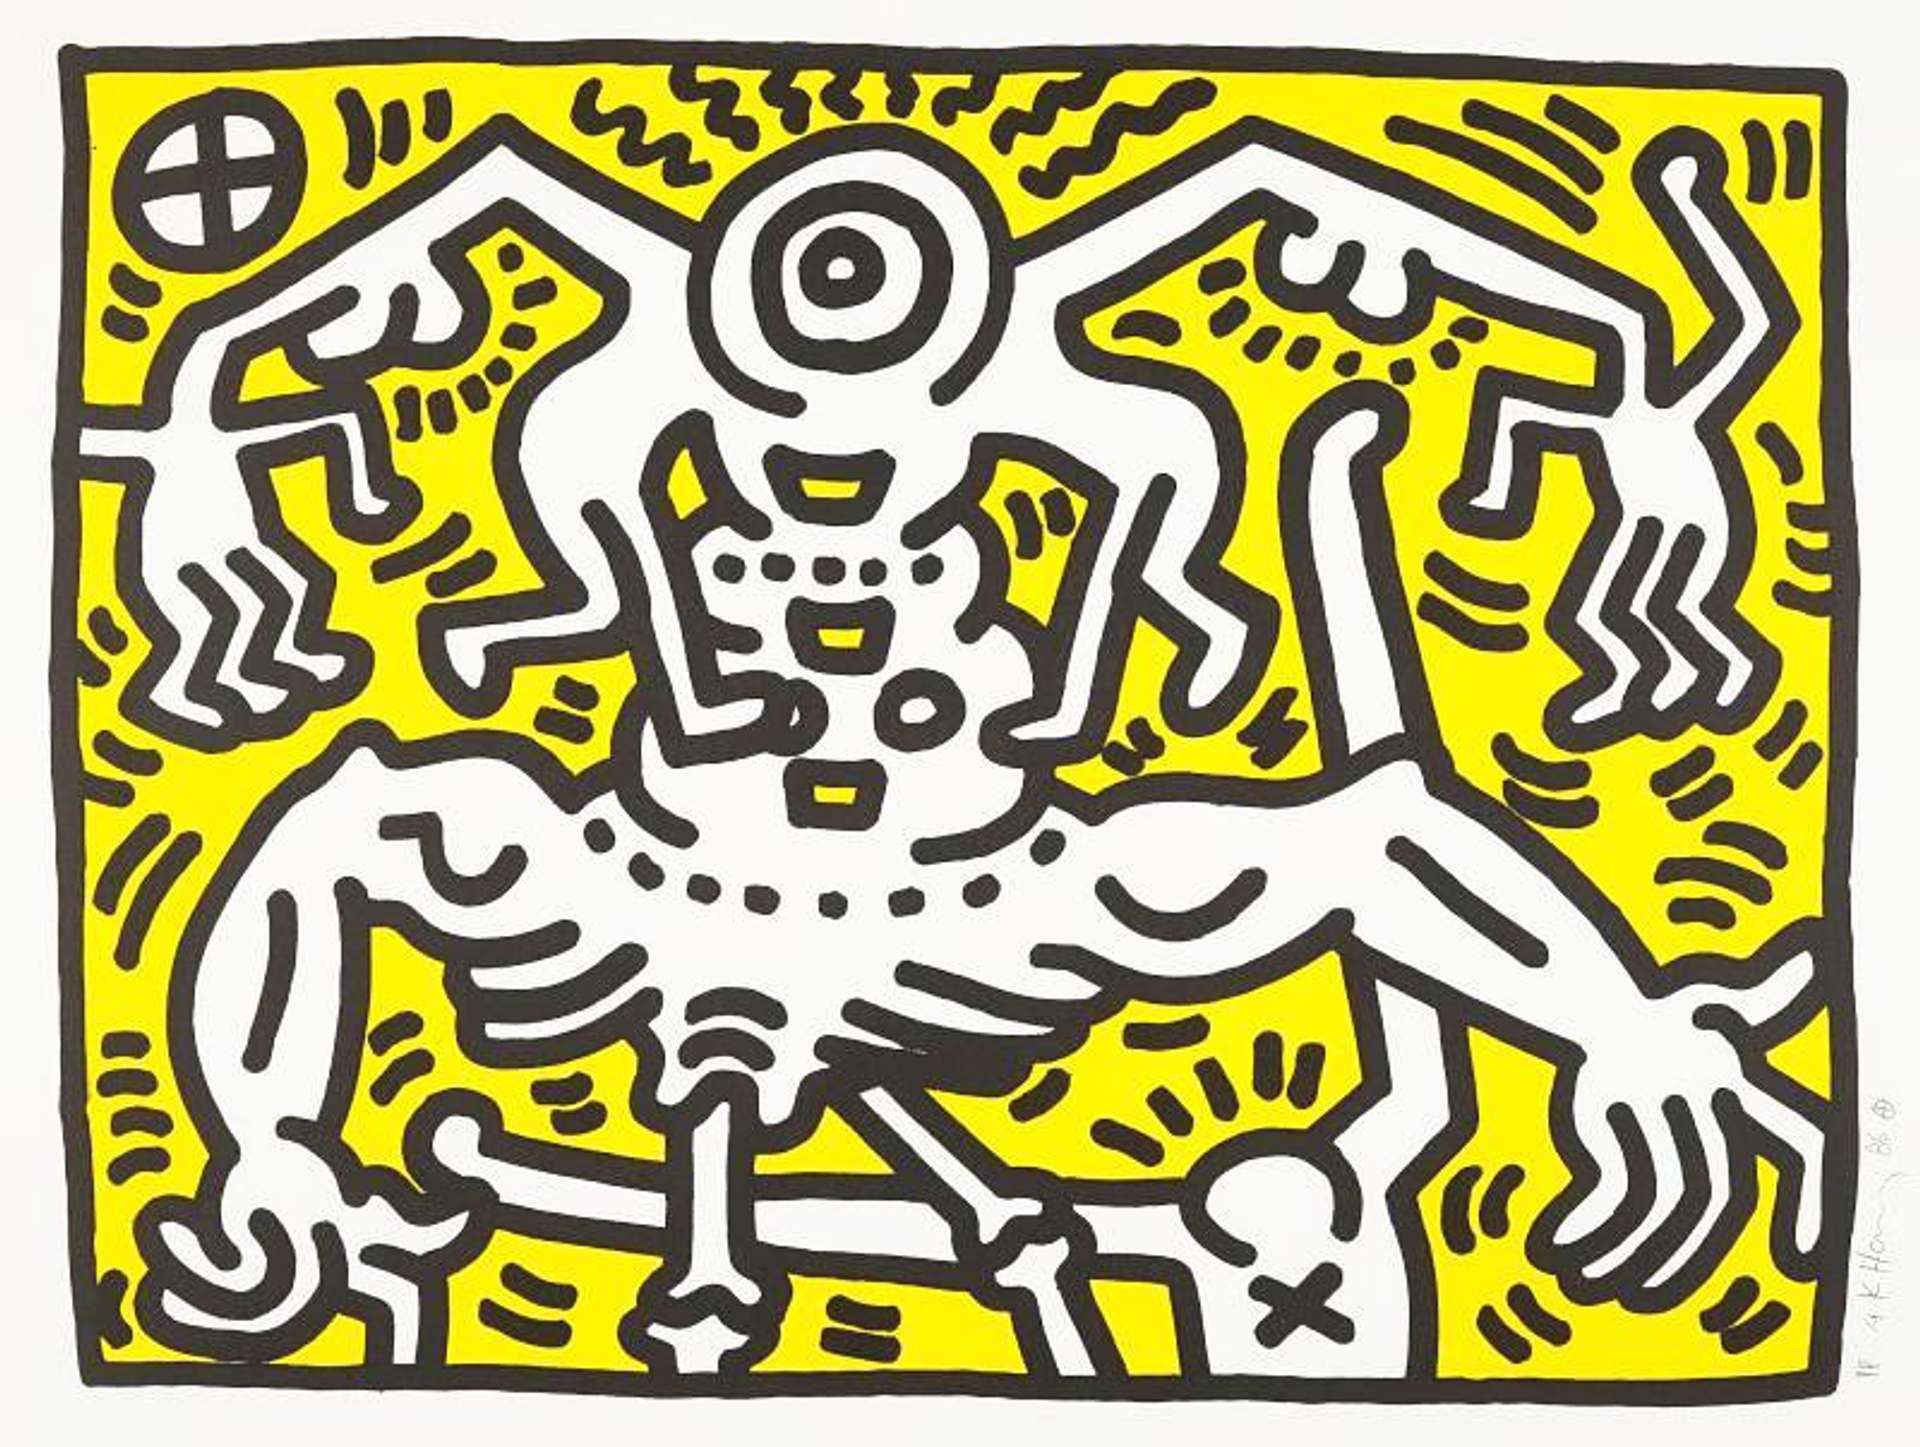 Untitled 1986 - Signed Print by Keith Haring 1986 - MyArtBroker